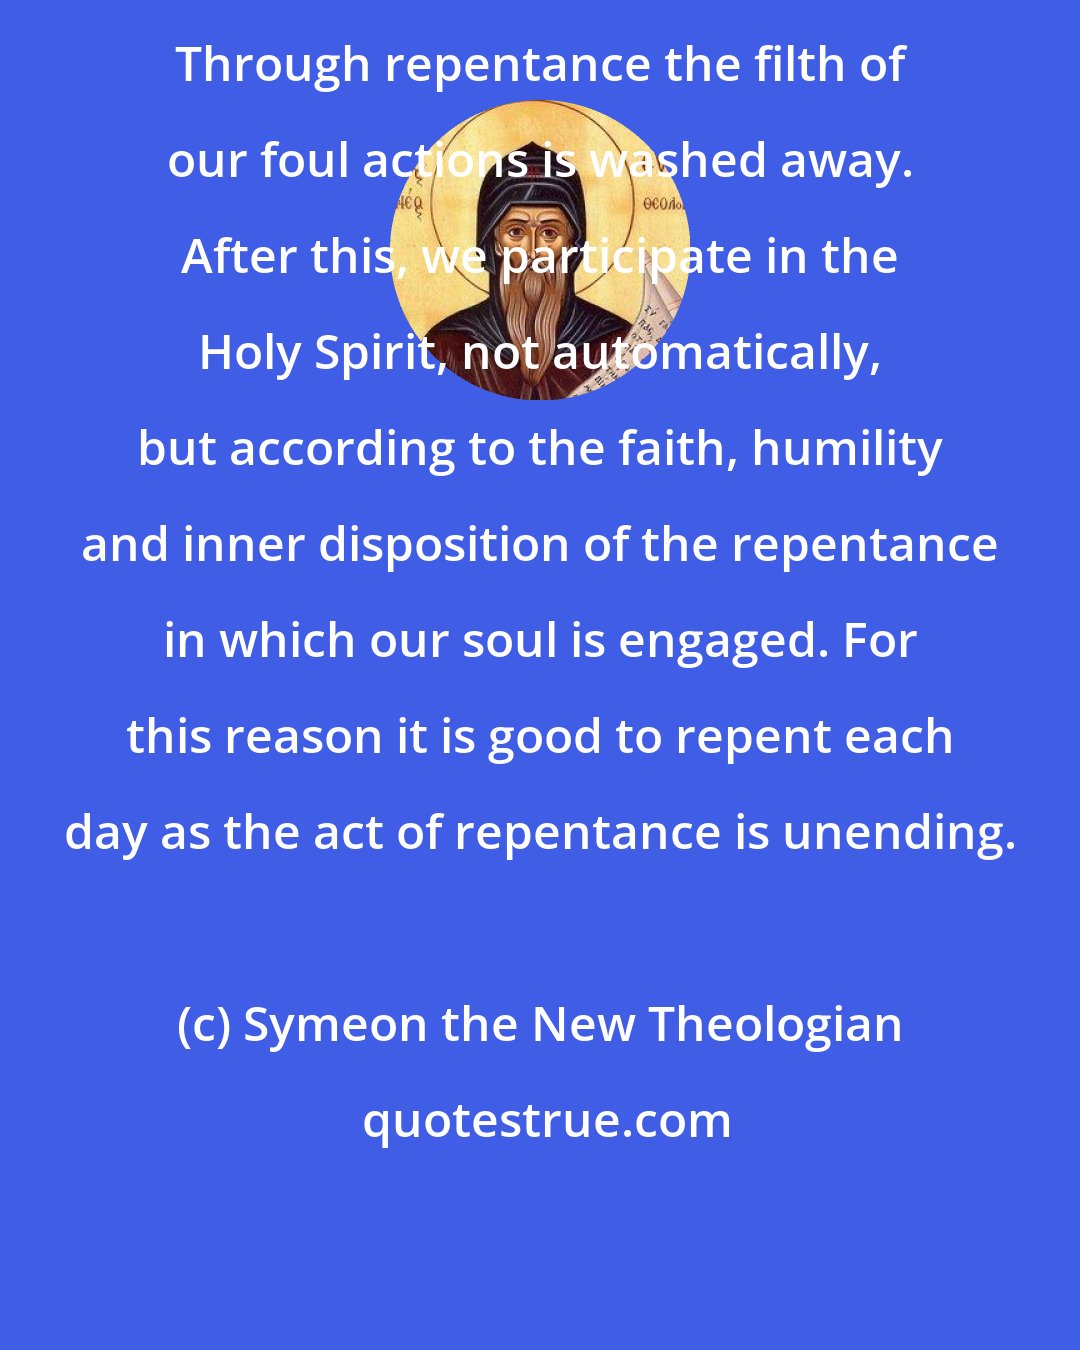 Symeon the New Theologian: Through repentance the filth of our foul actions is washed away. After this, we participate in the Holy Spirit, not automatically, but according to the faith, humility and inner disposition of the repentance in which our soul is engaged. For this reason it is good to repent each day as the act of repentance is unending.